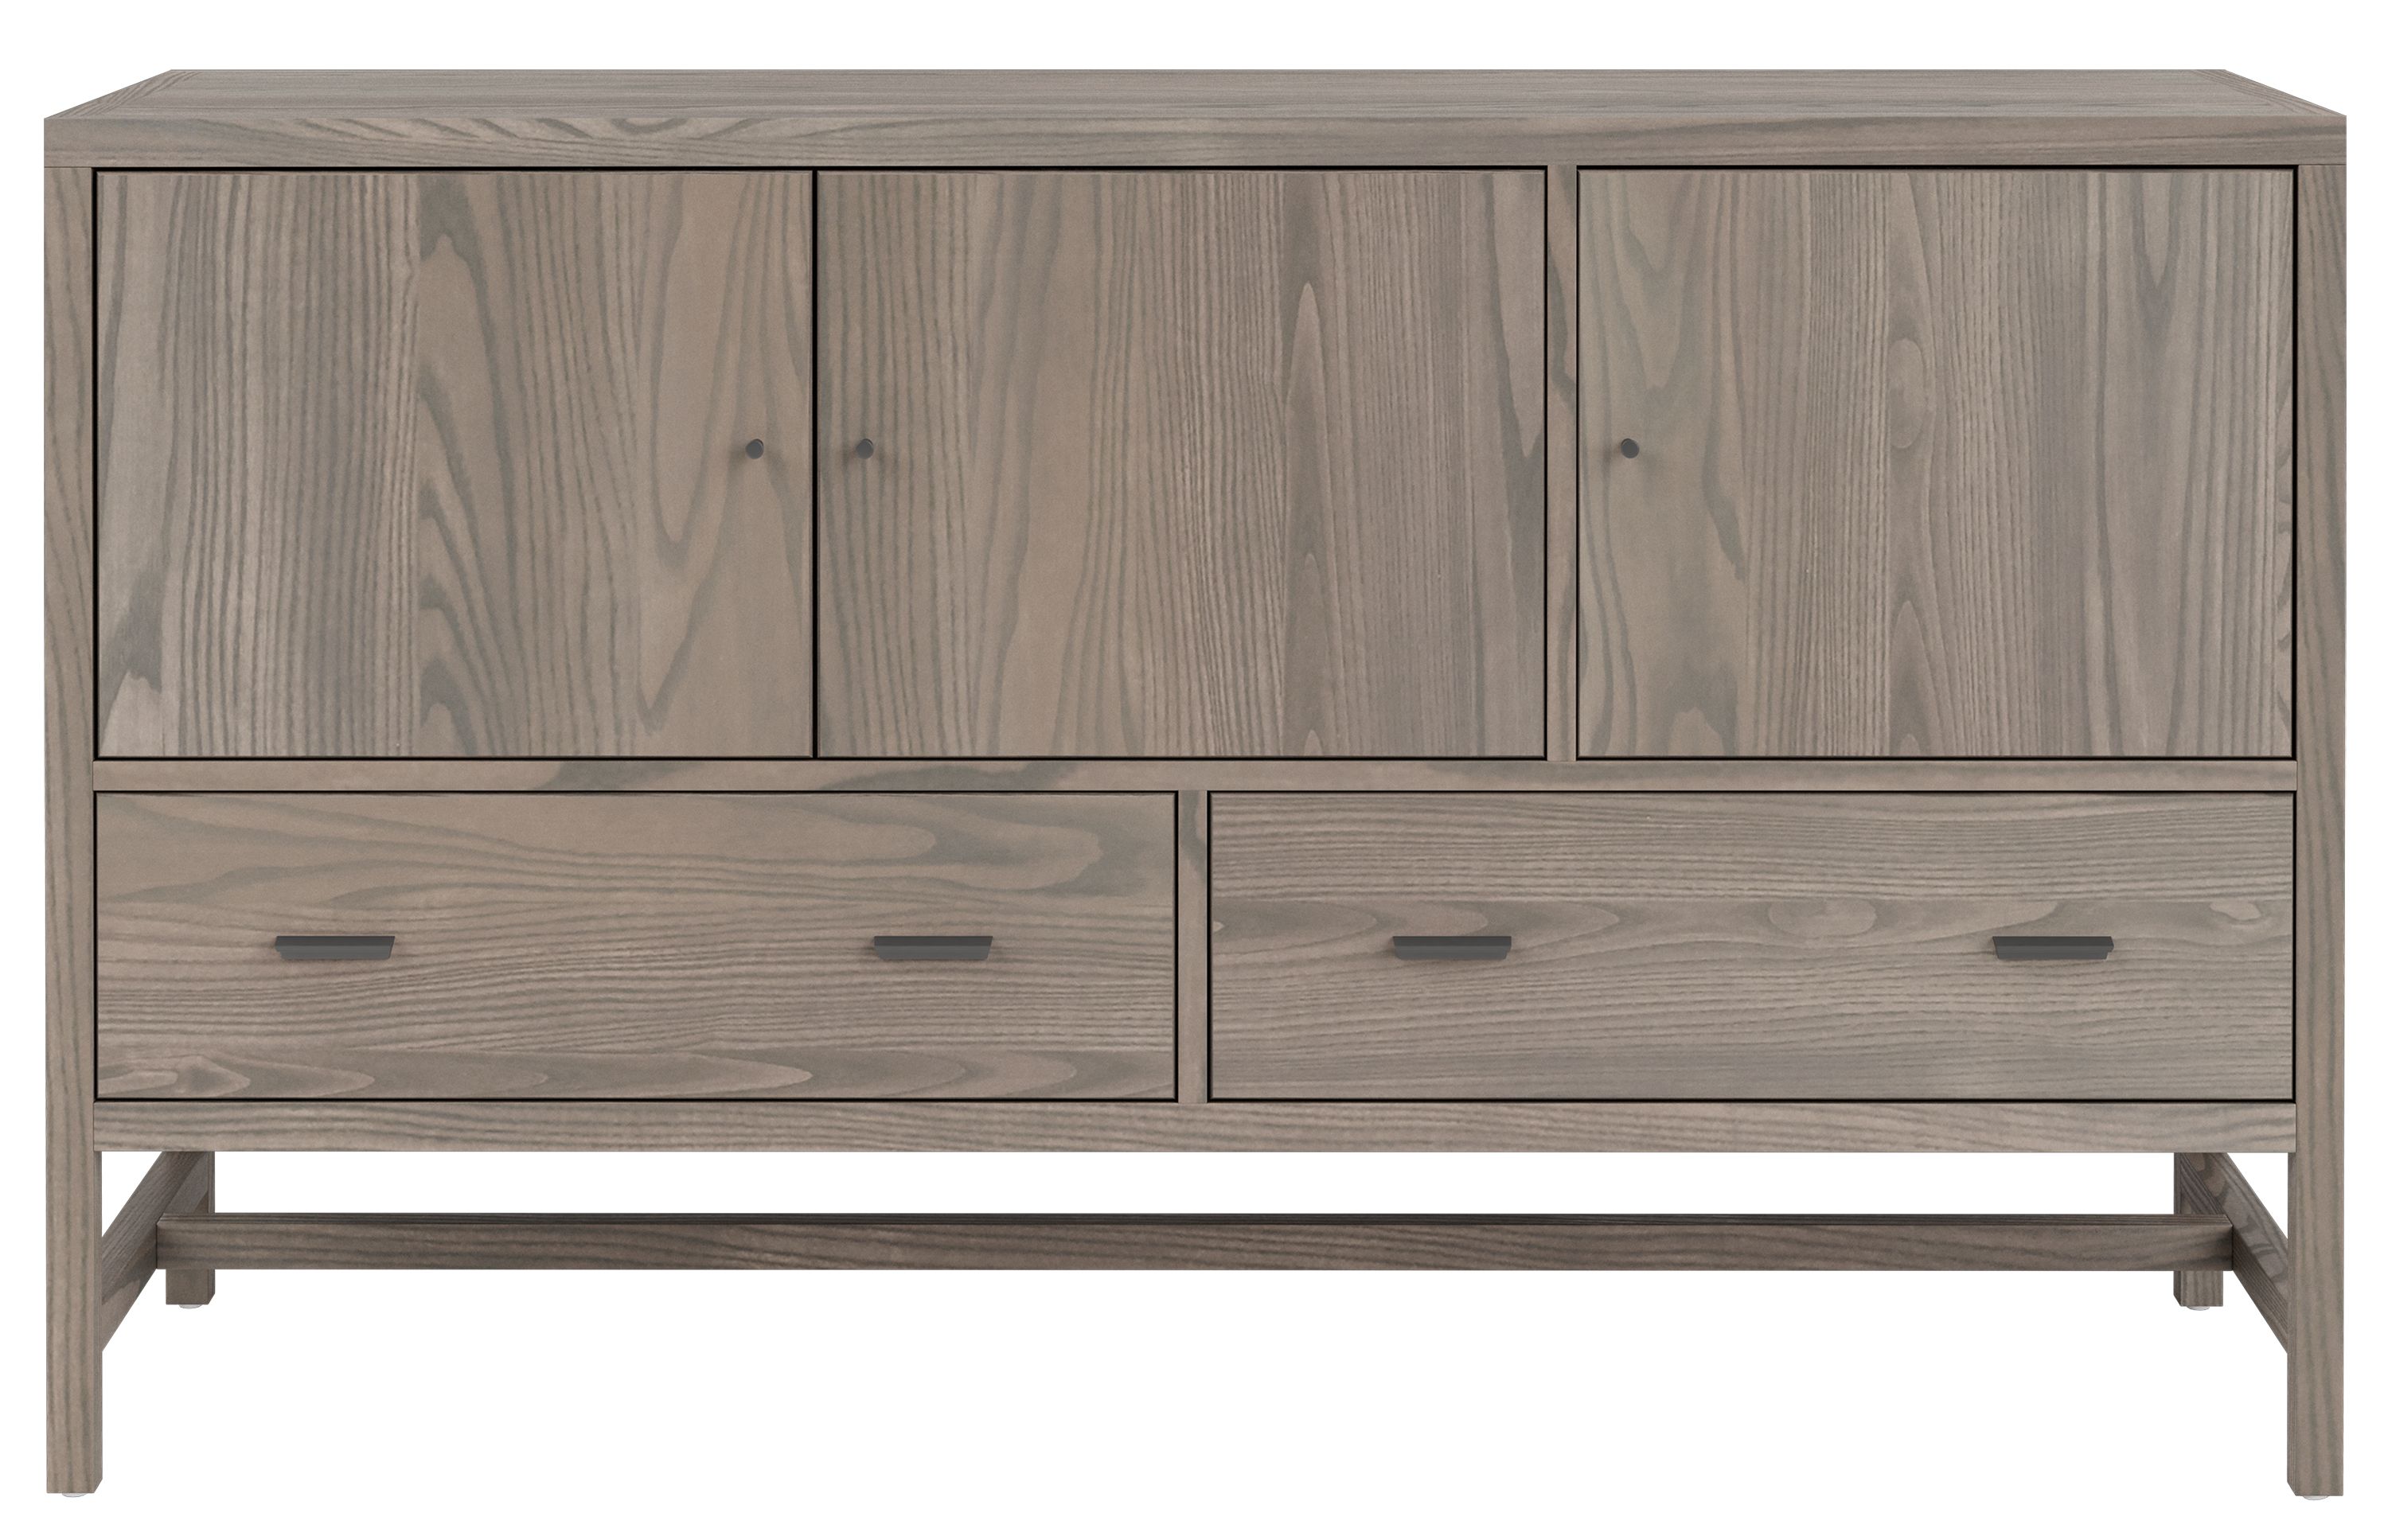 https://rnb.scene7.com/is/image/roomandboard/?layer=0&size=2400,2400&scl=1&src=430126_wood_SHELL&layer=1&size=2400,2400&scl=1&src=430126_pull_brnk&layer=2&size=2400,2400&scl=1&src=430126_top_MBWHTCER&layer=comp&$prodzoom0$